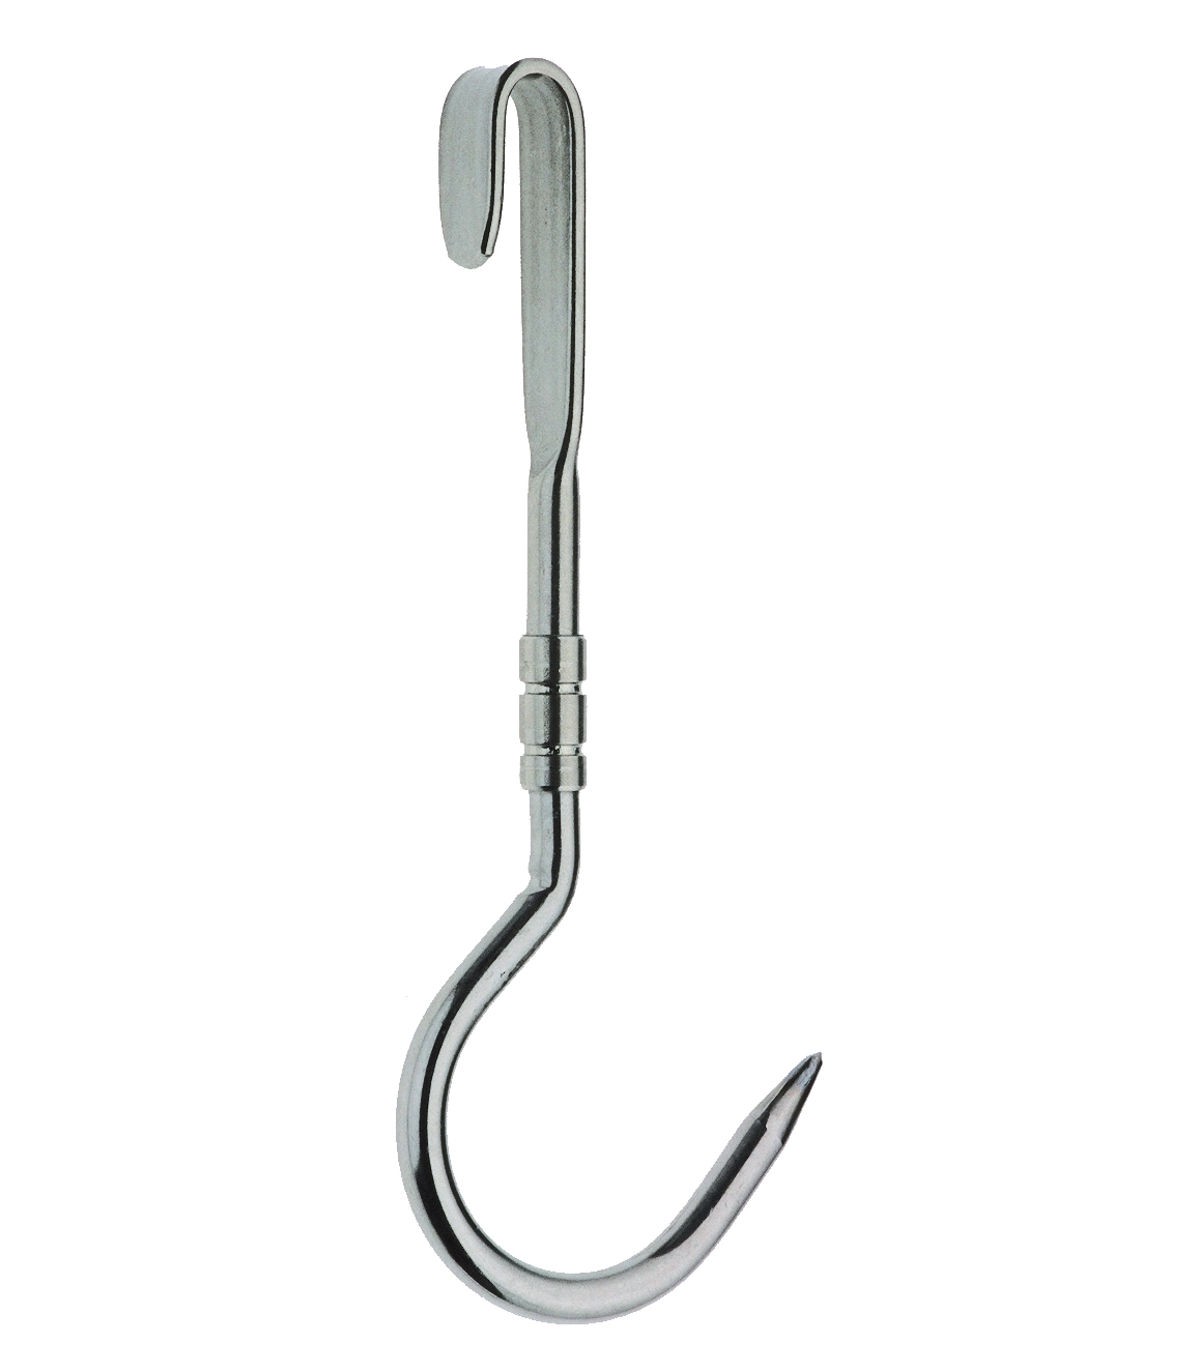 Sliving and rotating stainless steel meat hook